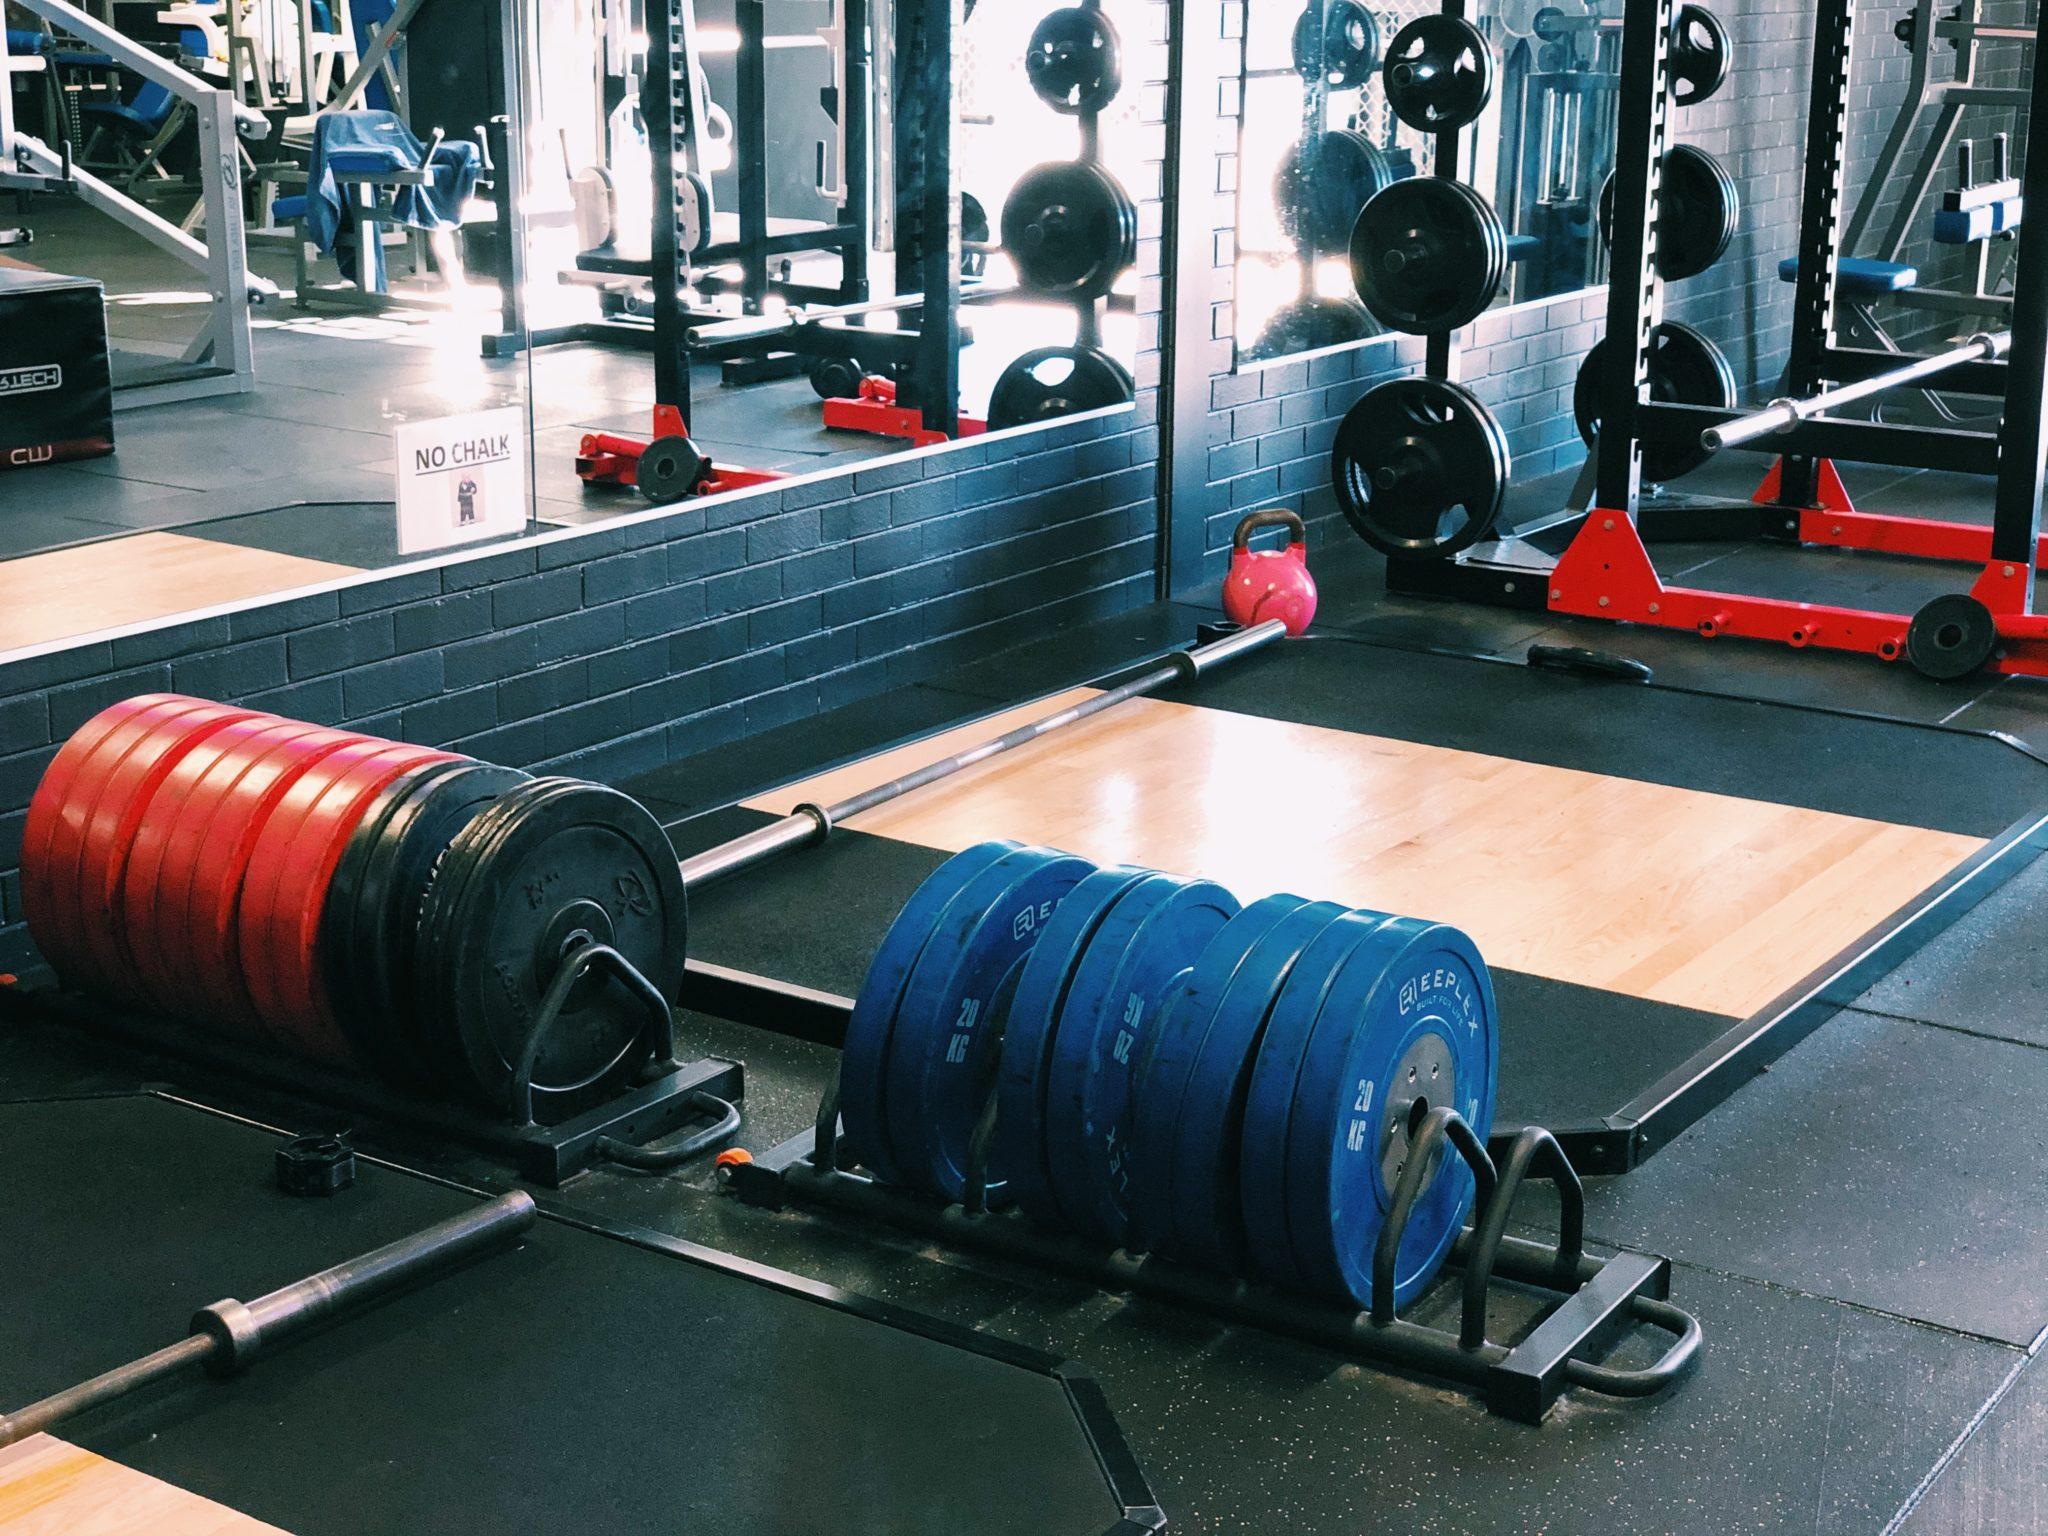 8 Gym Insurance Policies Your Business Needs - Boutique Fitness